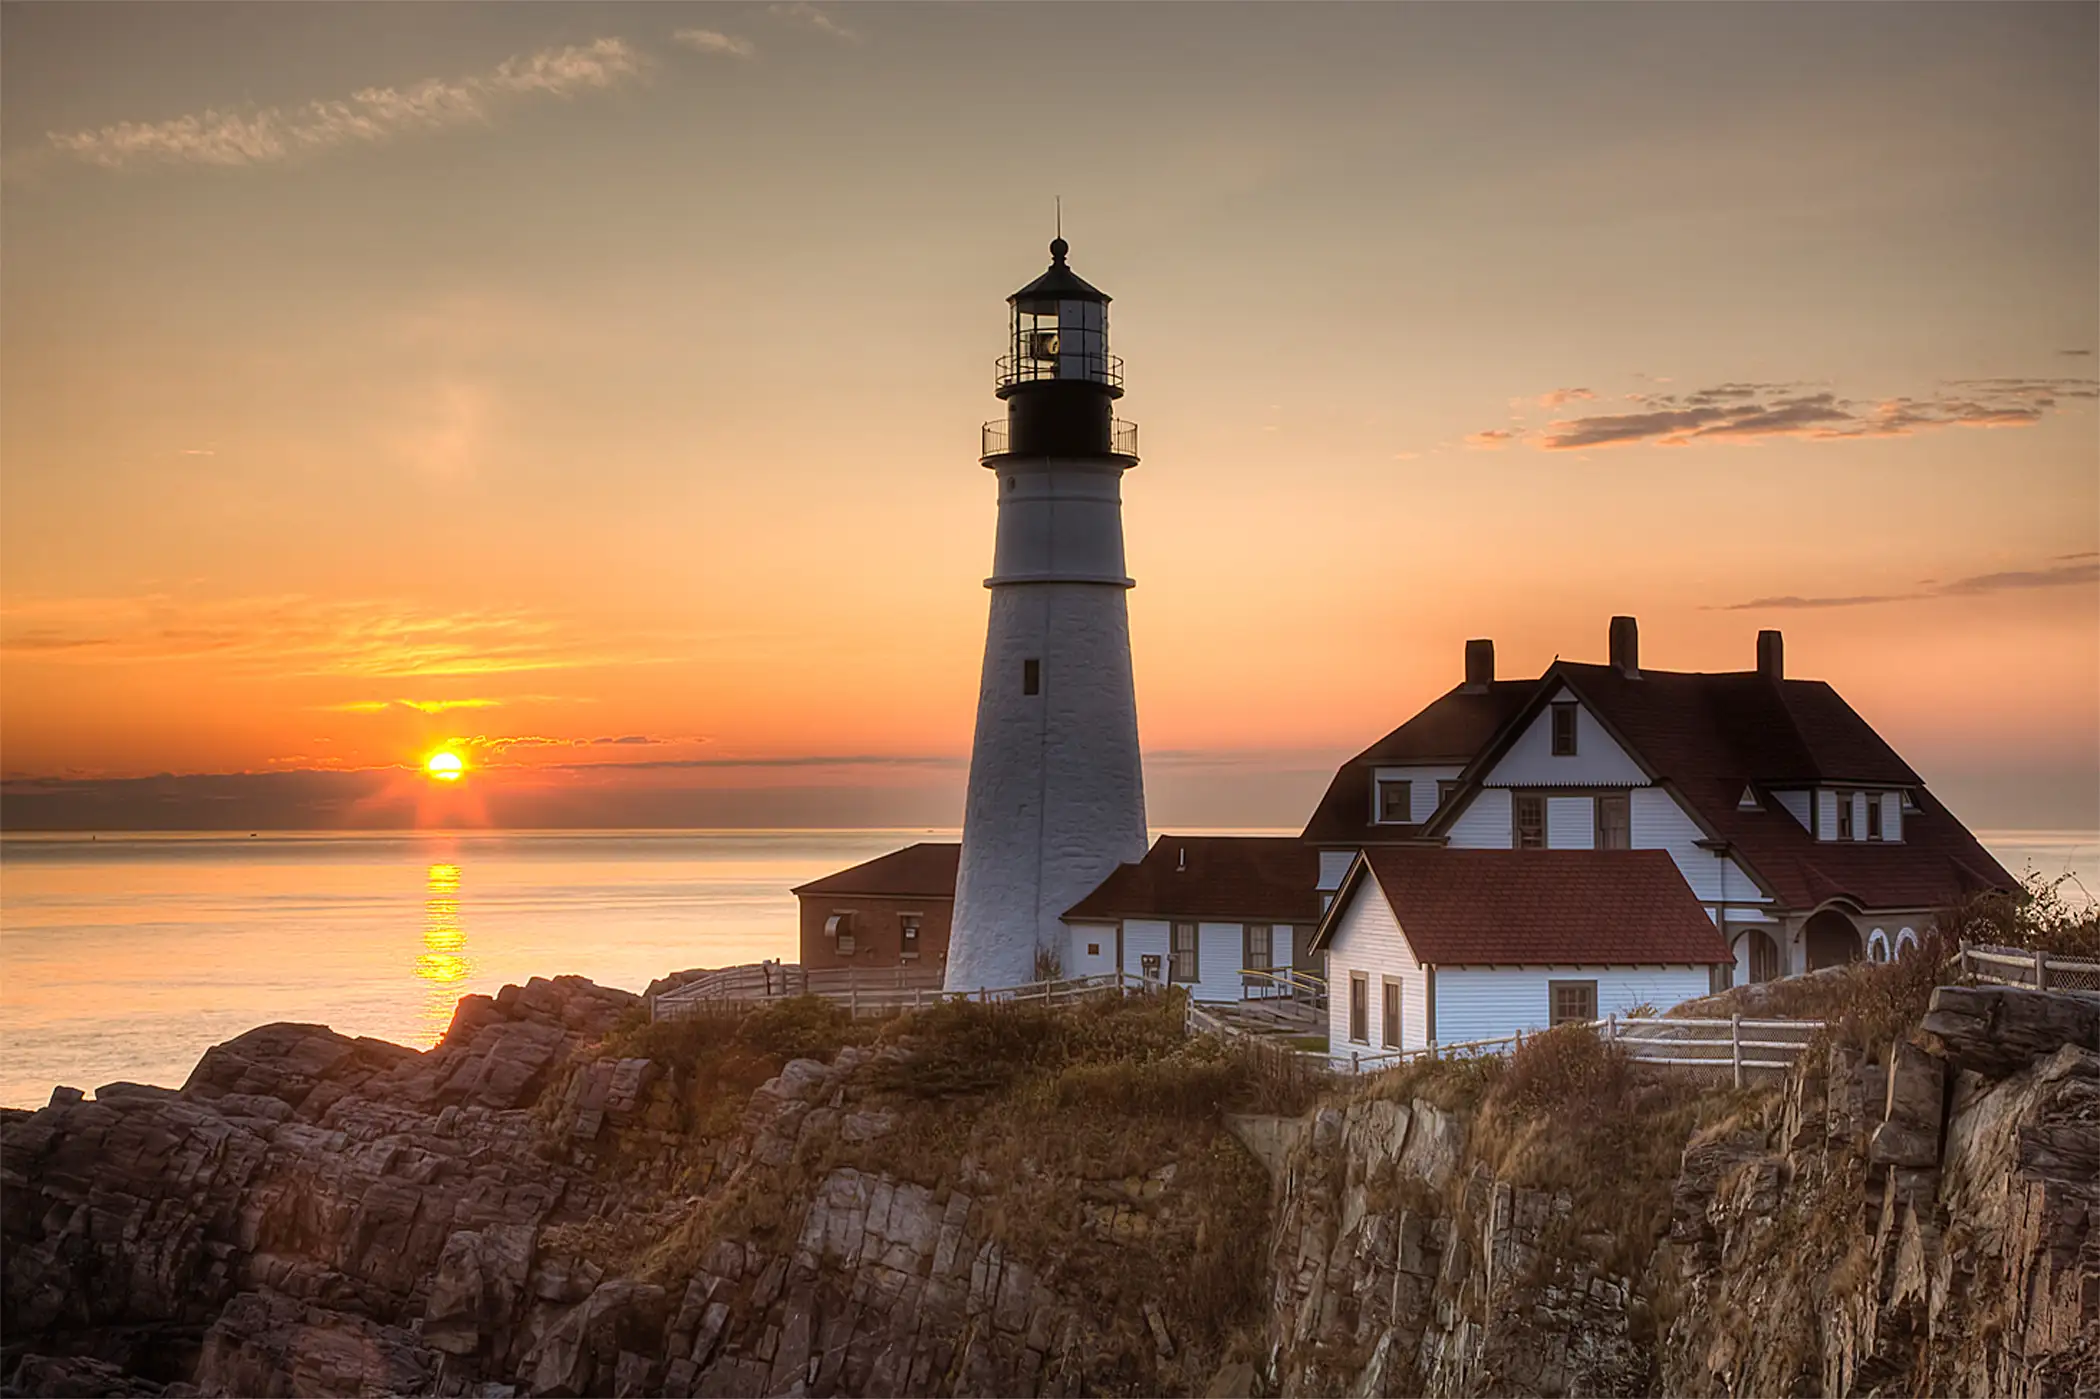 The first rays of sun after sunrise reach the Portland Head Light, built in 1791, which protects mariners entering Casco Bay. The lighthouse is located in Fort Williams Park, Cape Elizabeth, Maine, USA.